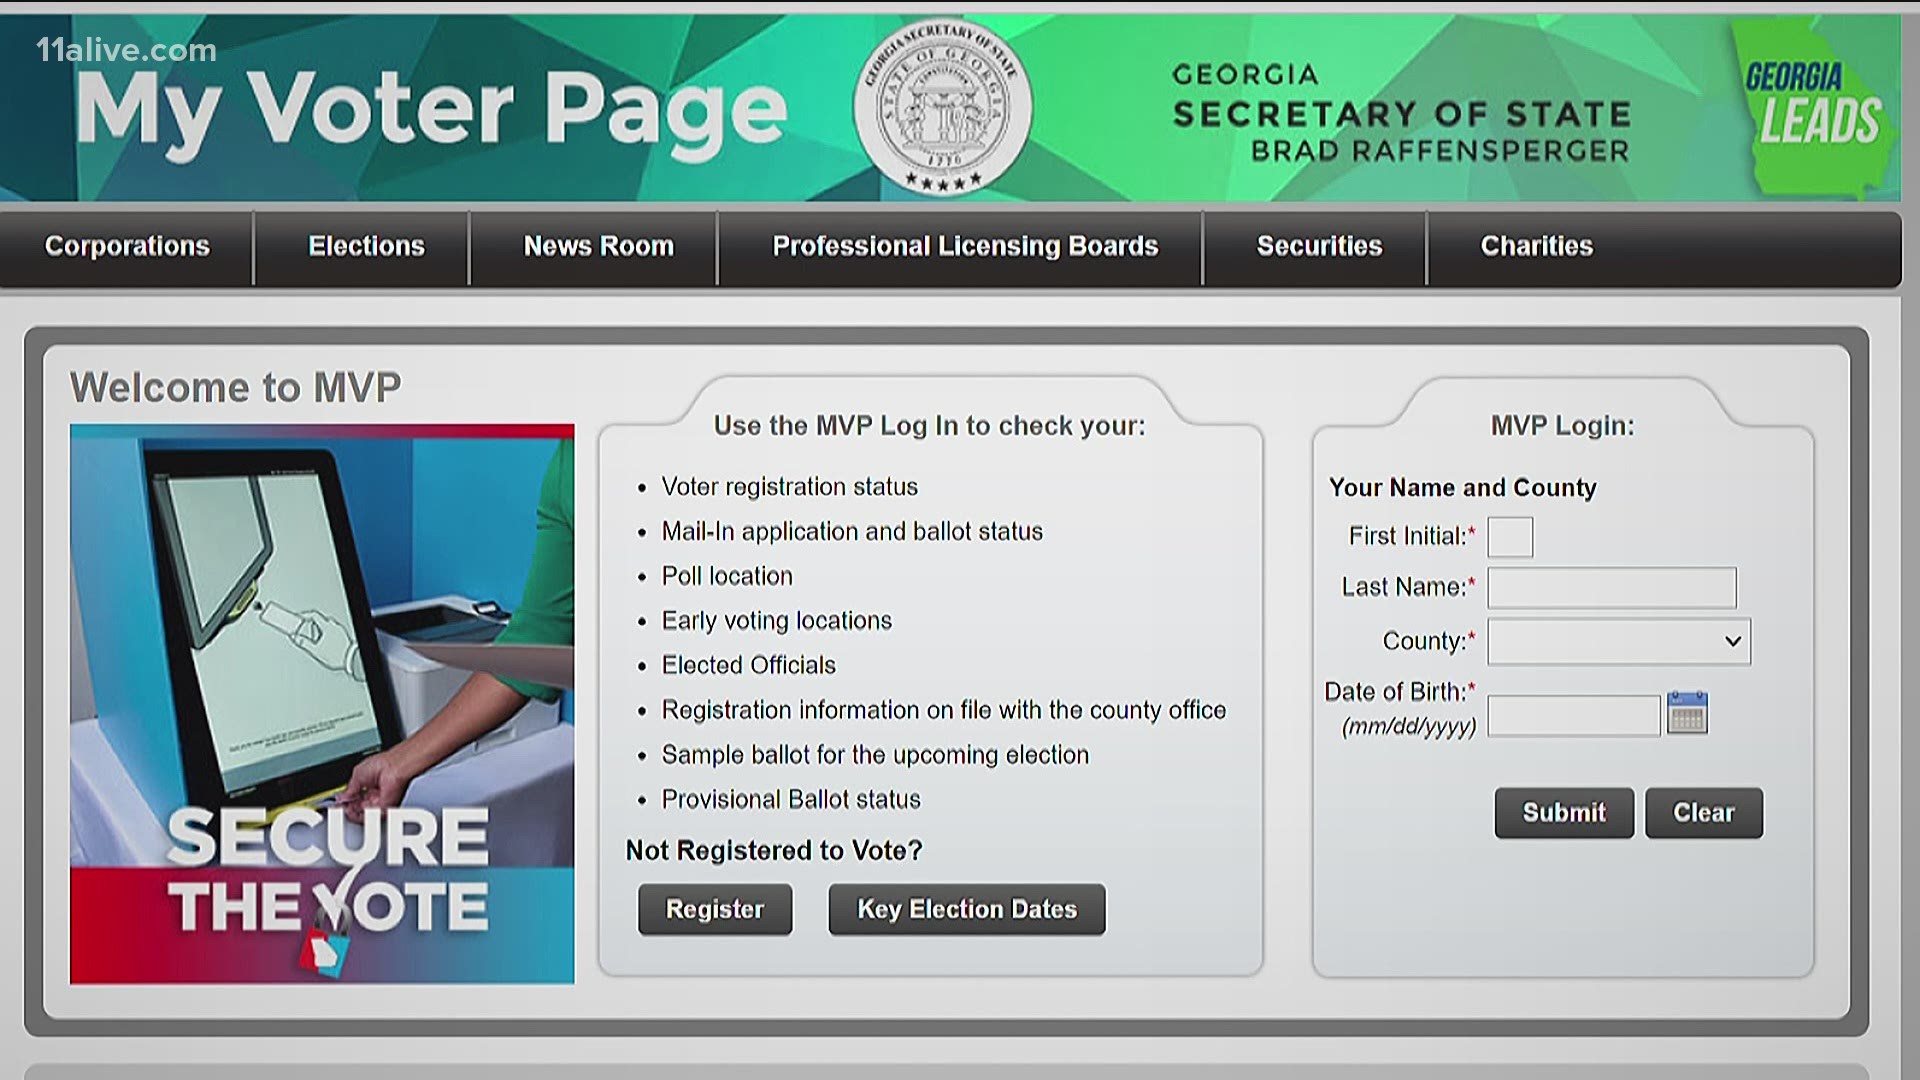 Here is how to check your voting status online